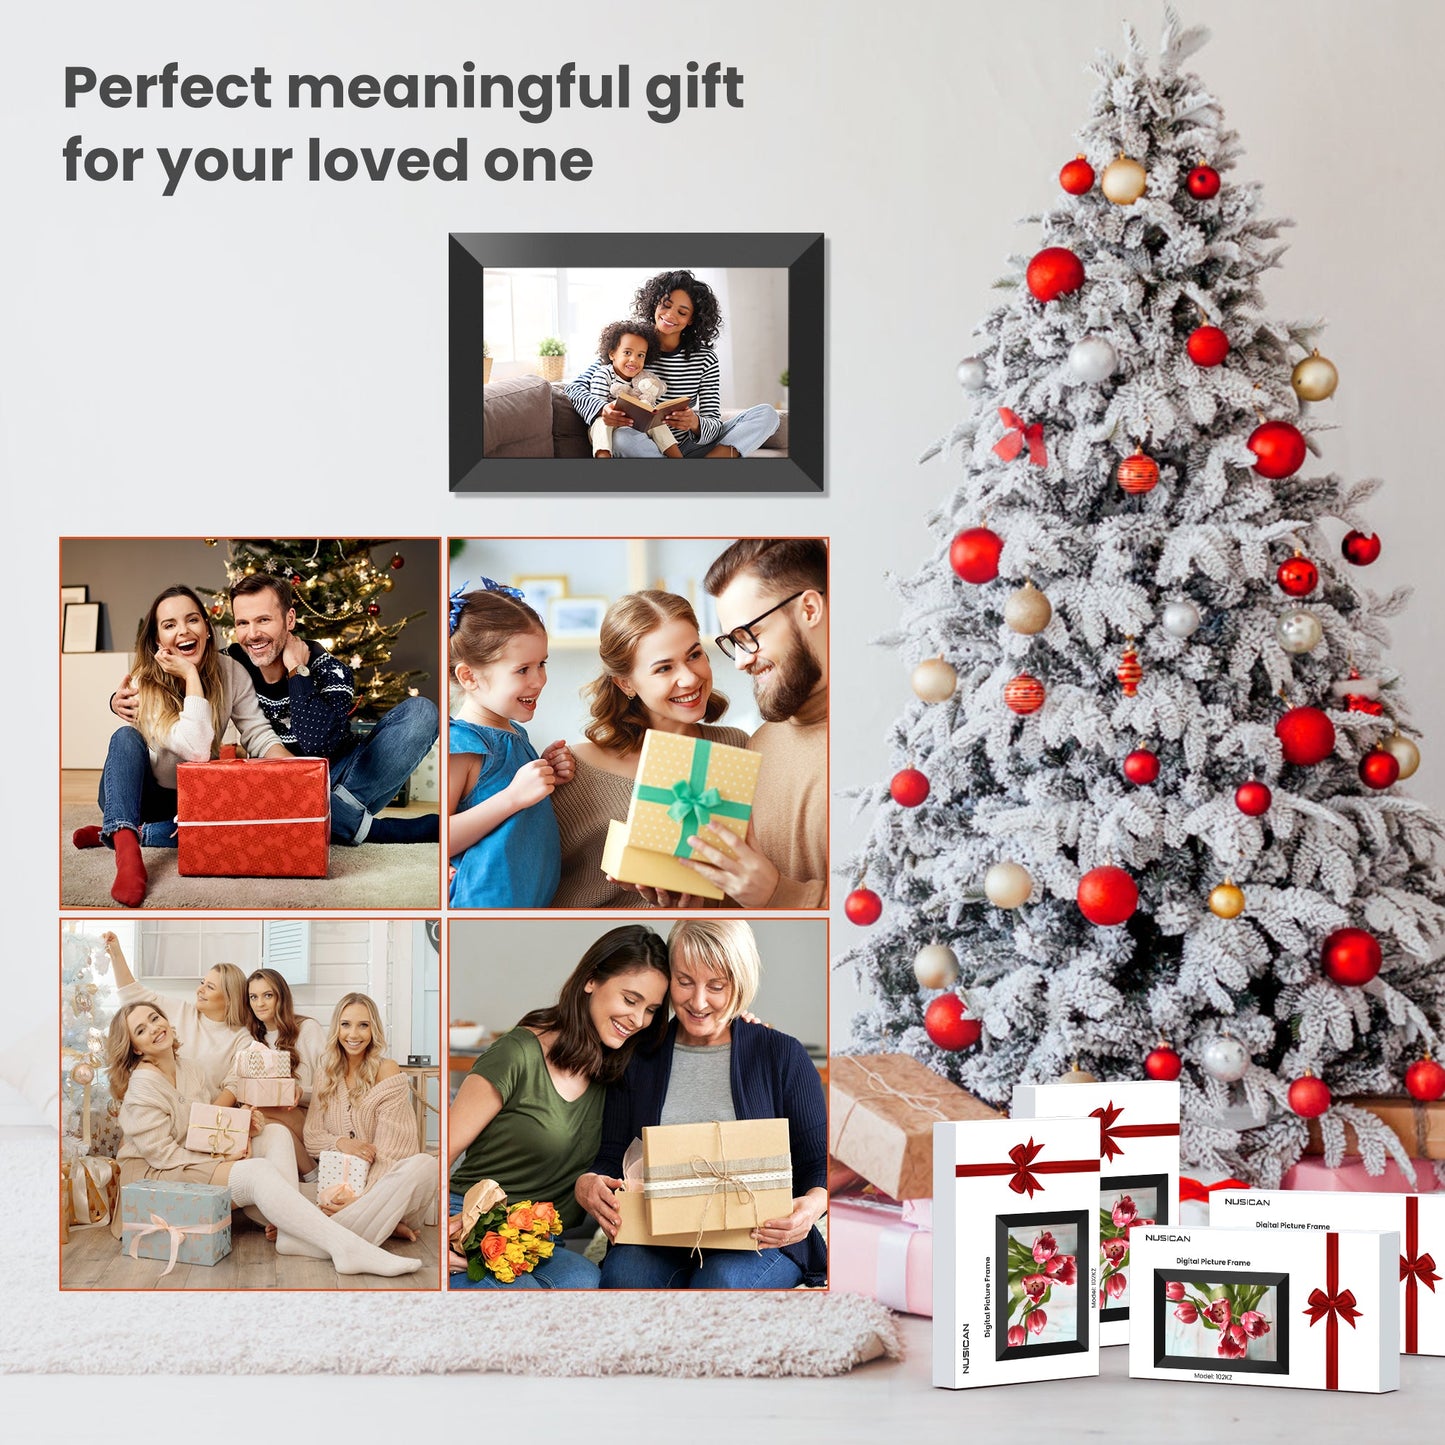 G210 WiFi Digital Picture Frame, 10.1" Smart Photo Frames Touch Screen with 32G Memory, HD Electric Picture Frame support Wall Mount, Auto-Rotate, Share Instant Photos from Anywhere, Best Gifts！